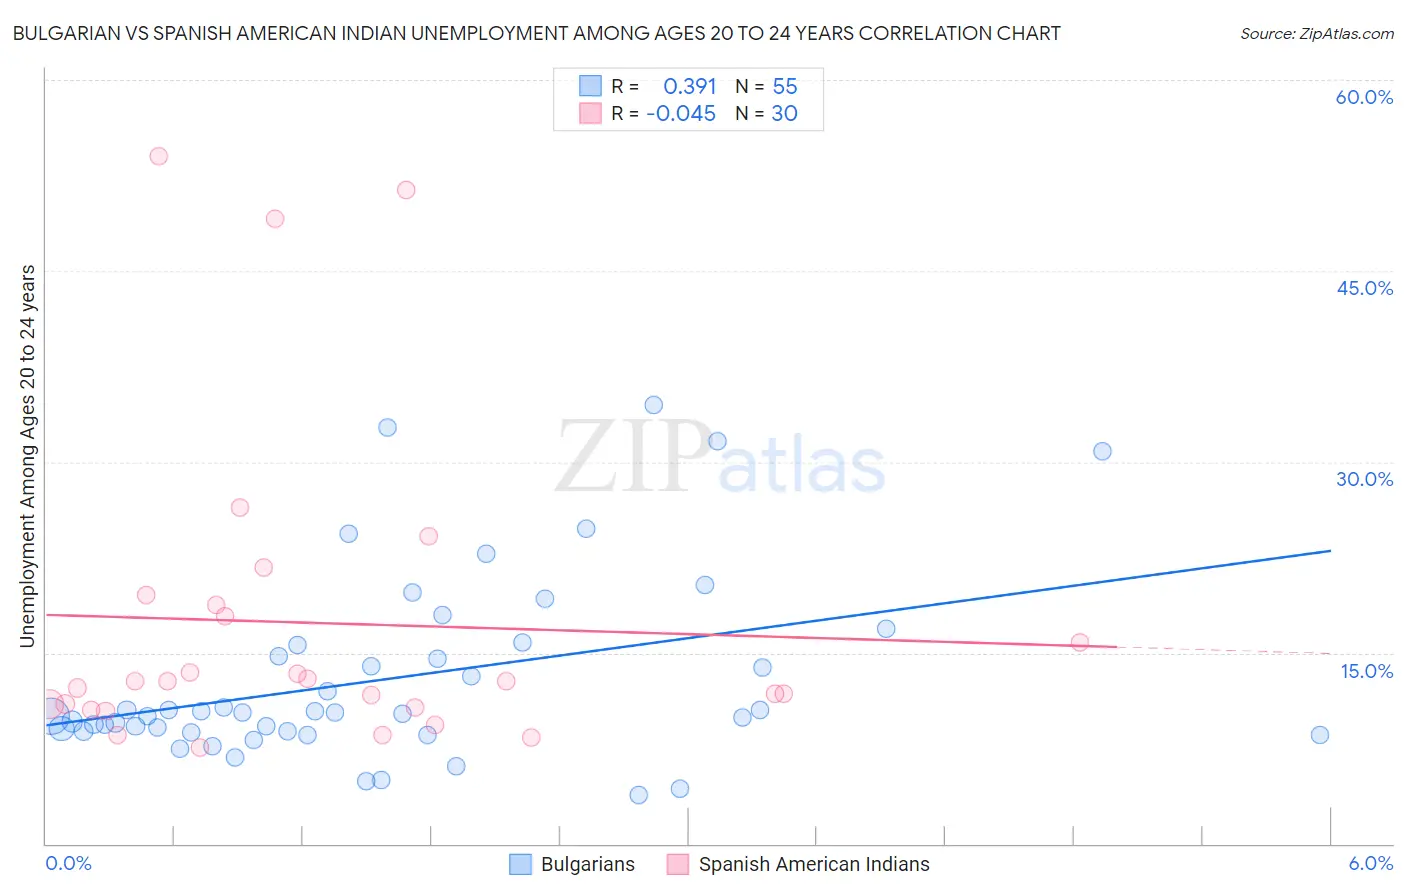 Bulgarian vs Spanish American Indian Unemployment Among Ages 20 to 24 years